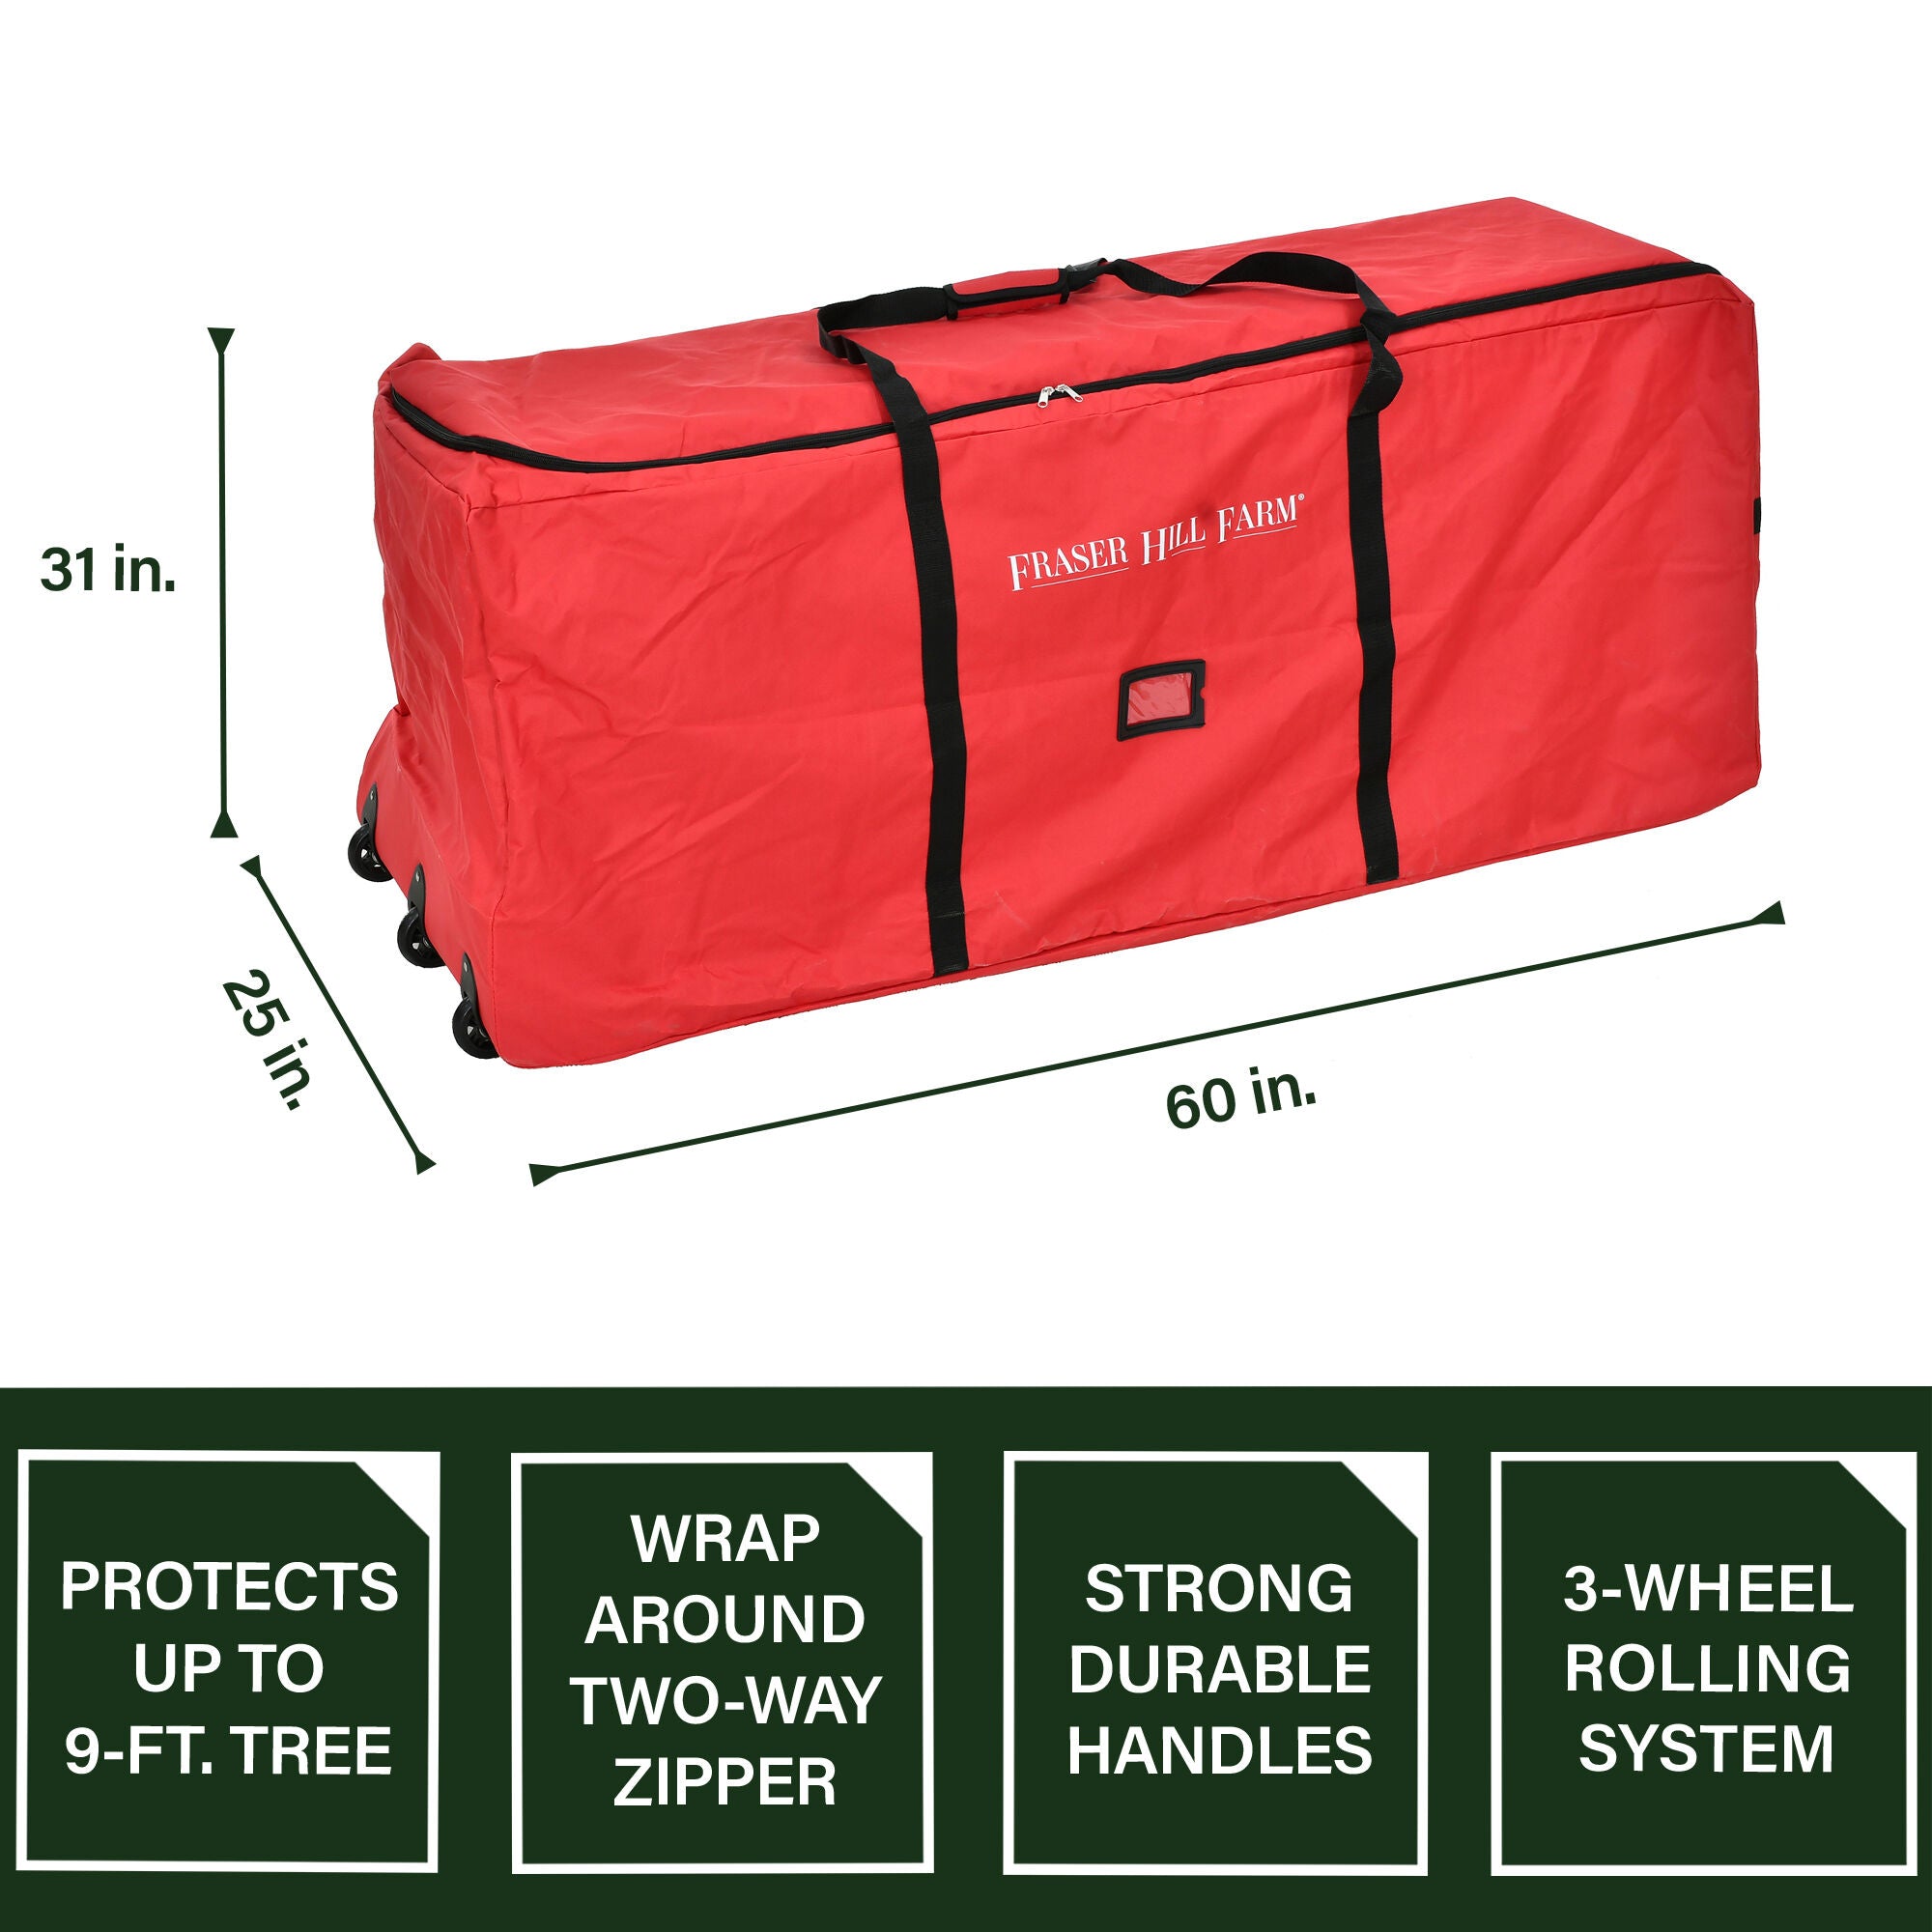 Fraser Hill Farm -  3-Wheel Rolling Storage Bag for Christmas Trees Up To 9 Feet, Red